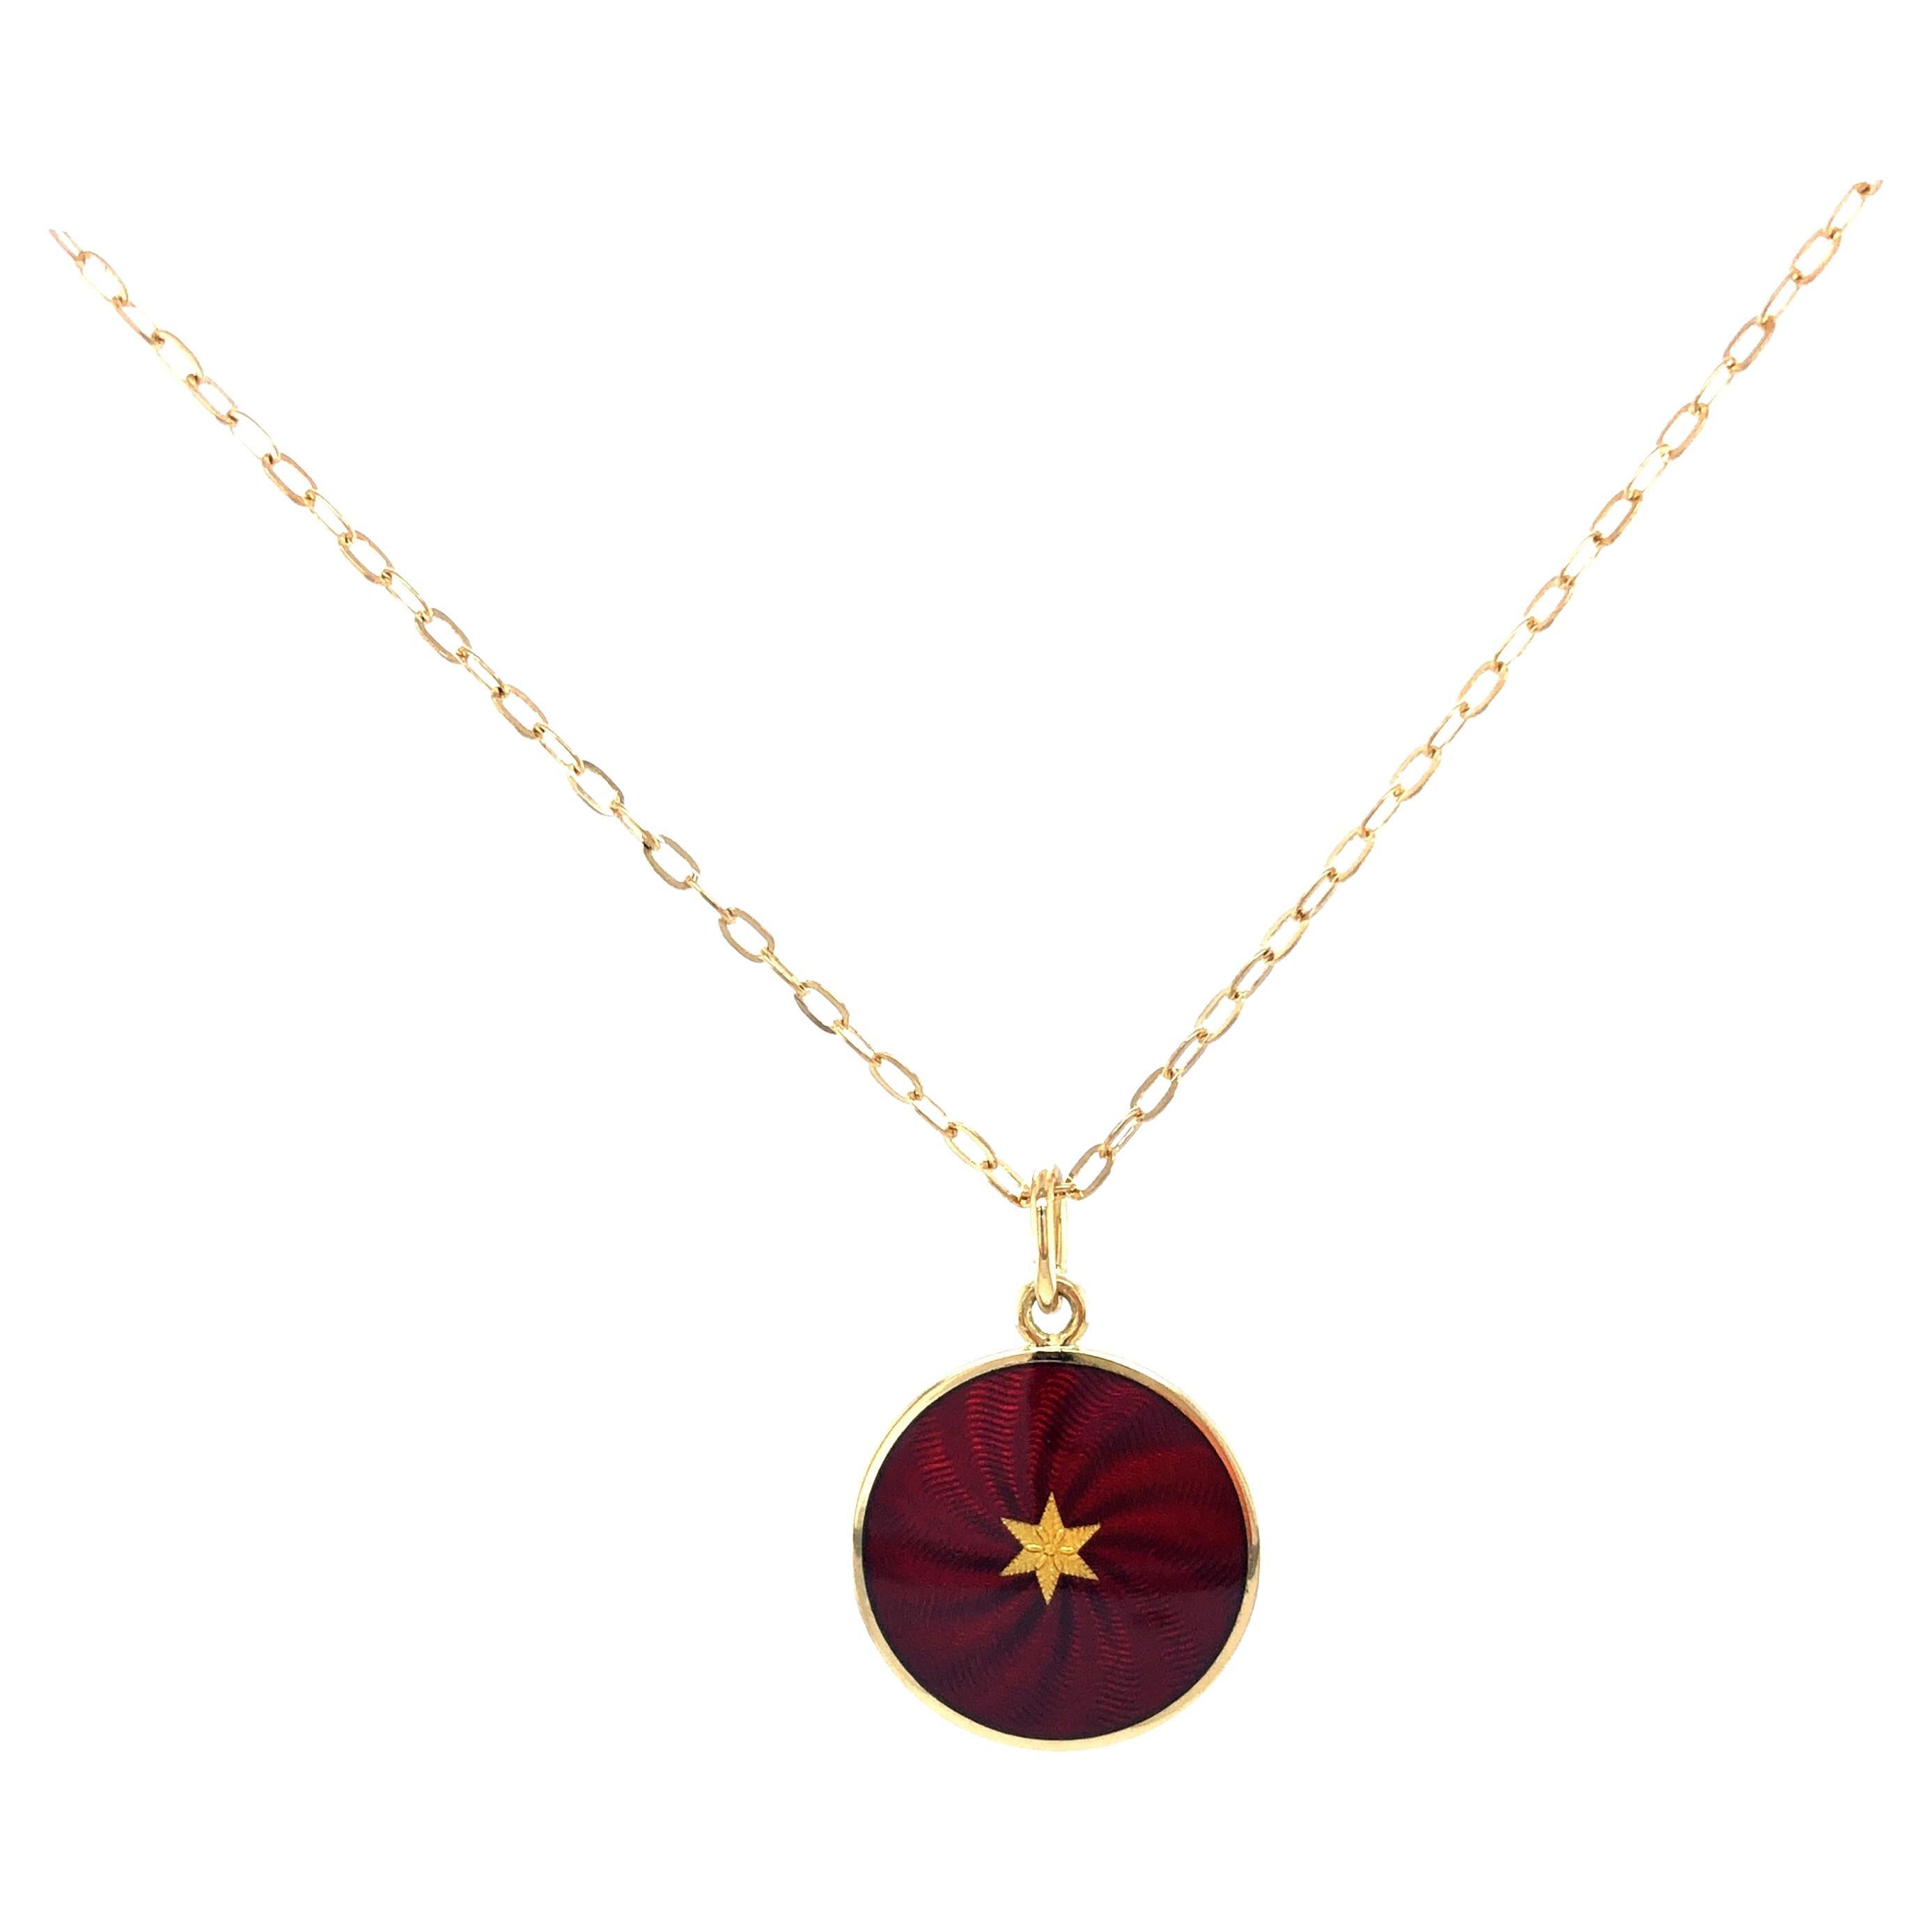 Round Disk Pendant, 18k Yellow Gold, Burgundy Red Guilloche Enamel Paillons For Sale